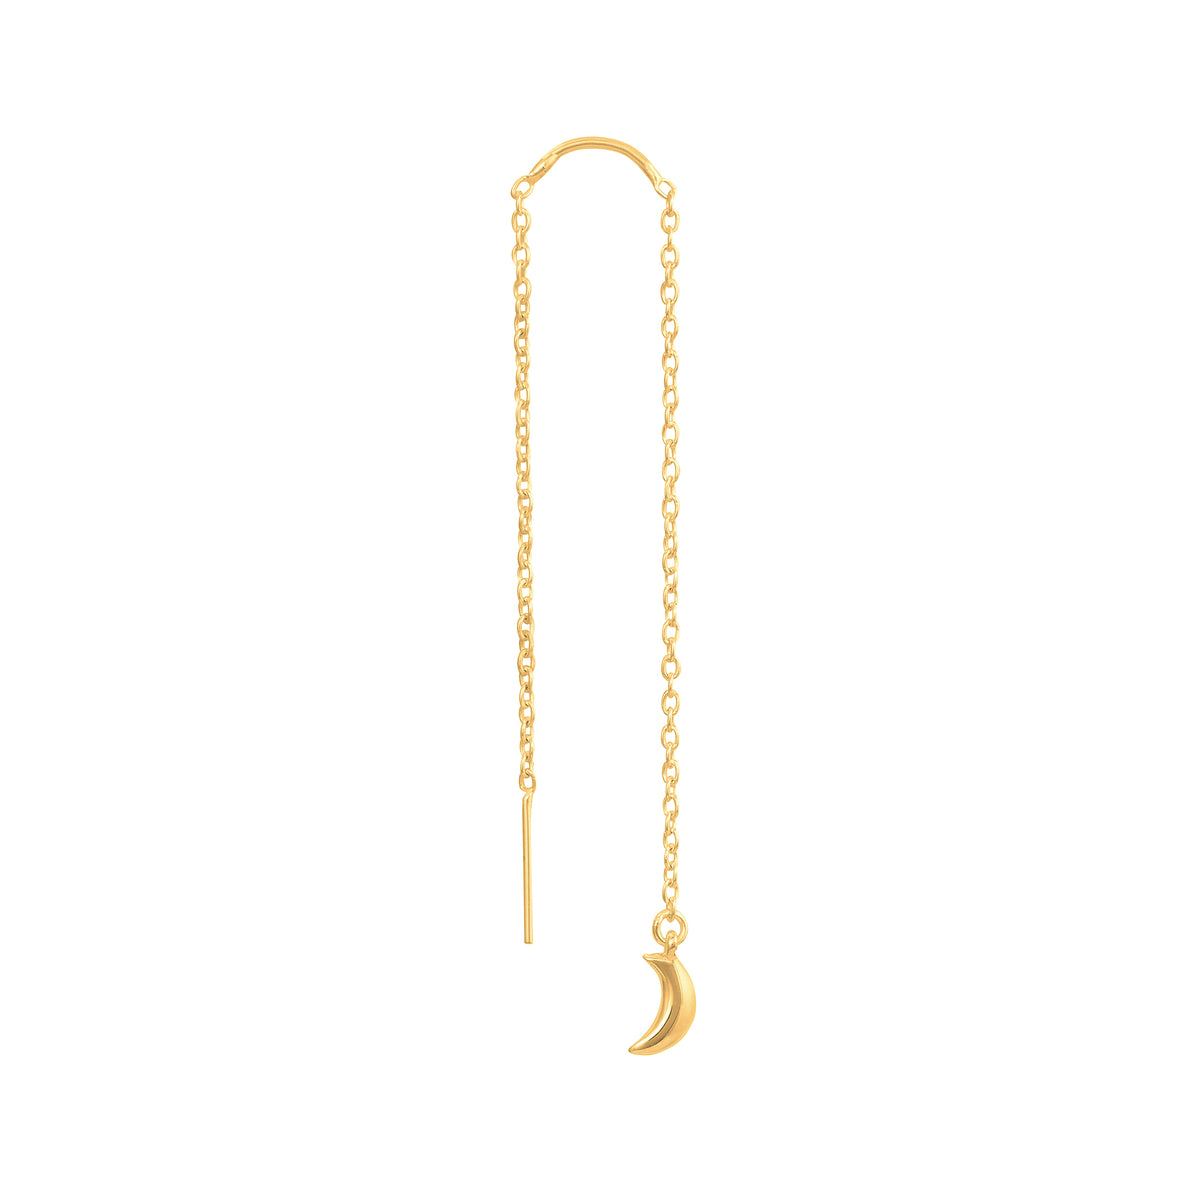 VIKA jewels floating moon earrings VOYAGE EXTRAORDINAIRE COLLECTION 5CM LONG LINK CHAIN WITH A 1CM MOON PENDANT IN THE FRONT 4CM LONG LINK CHAIN 925 recycled Sterling Silver gold plated